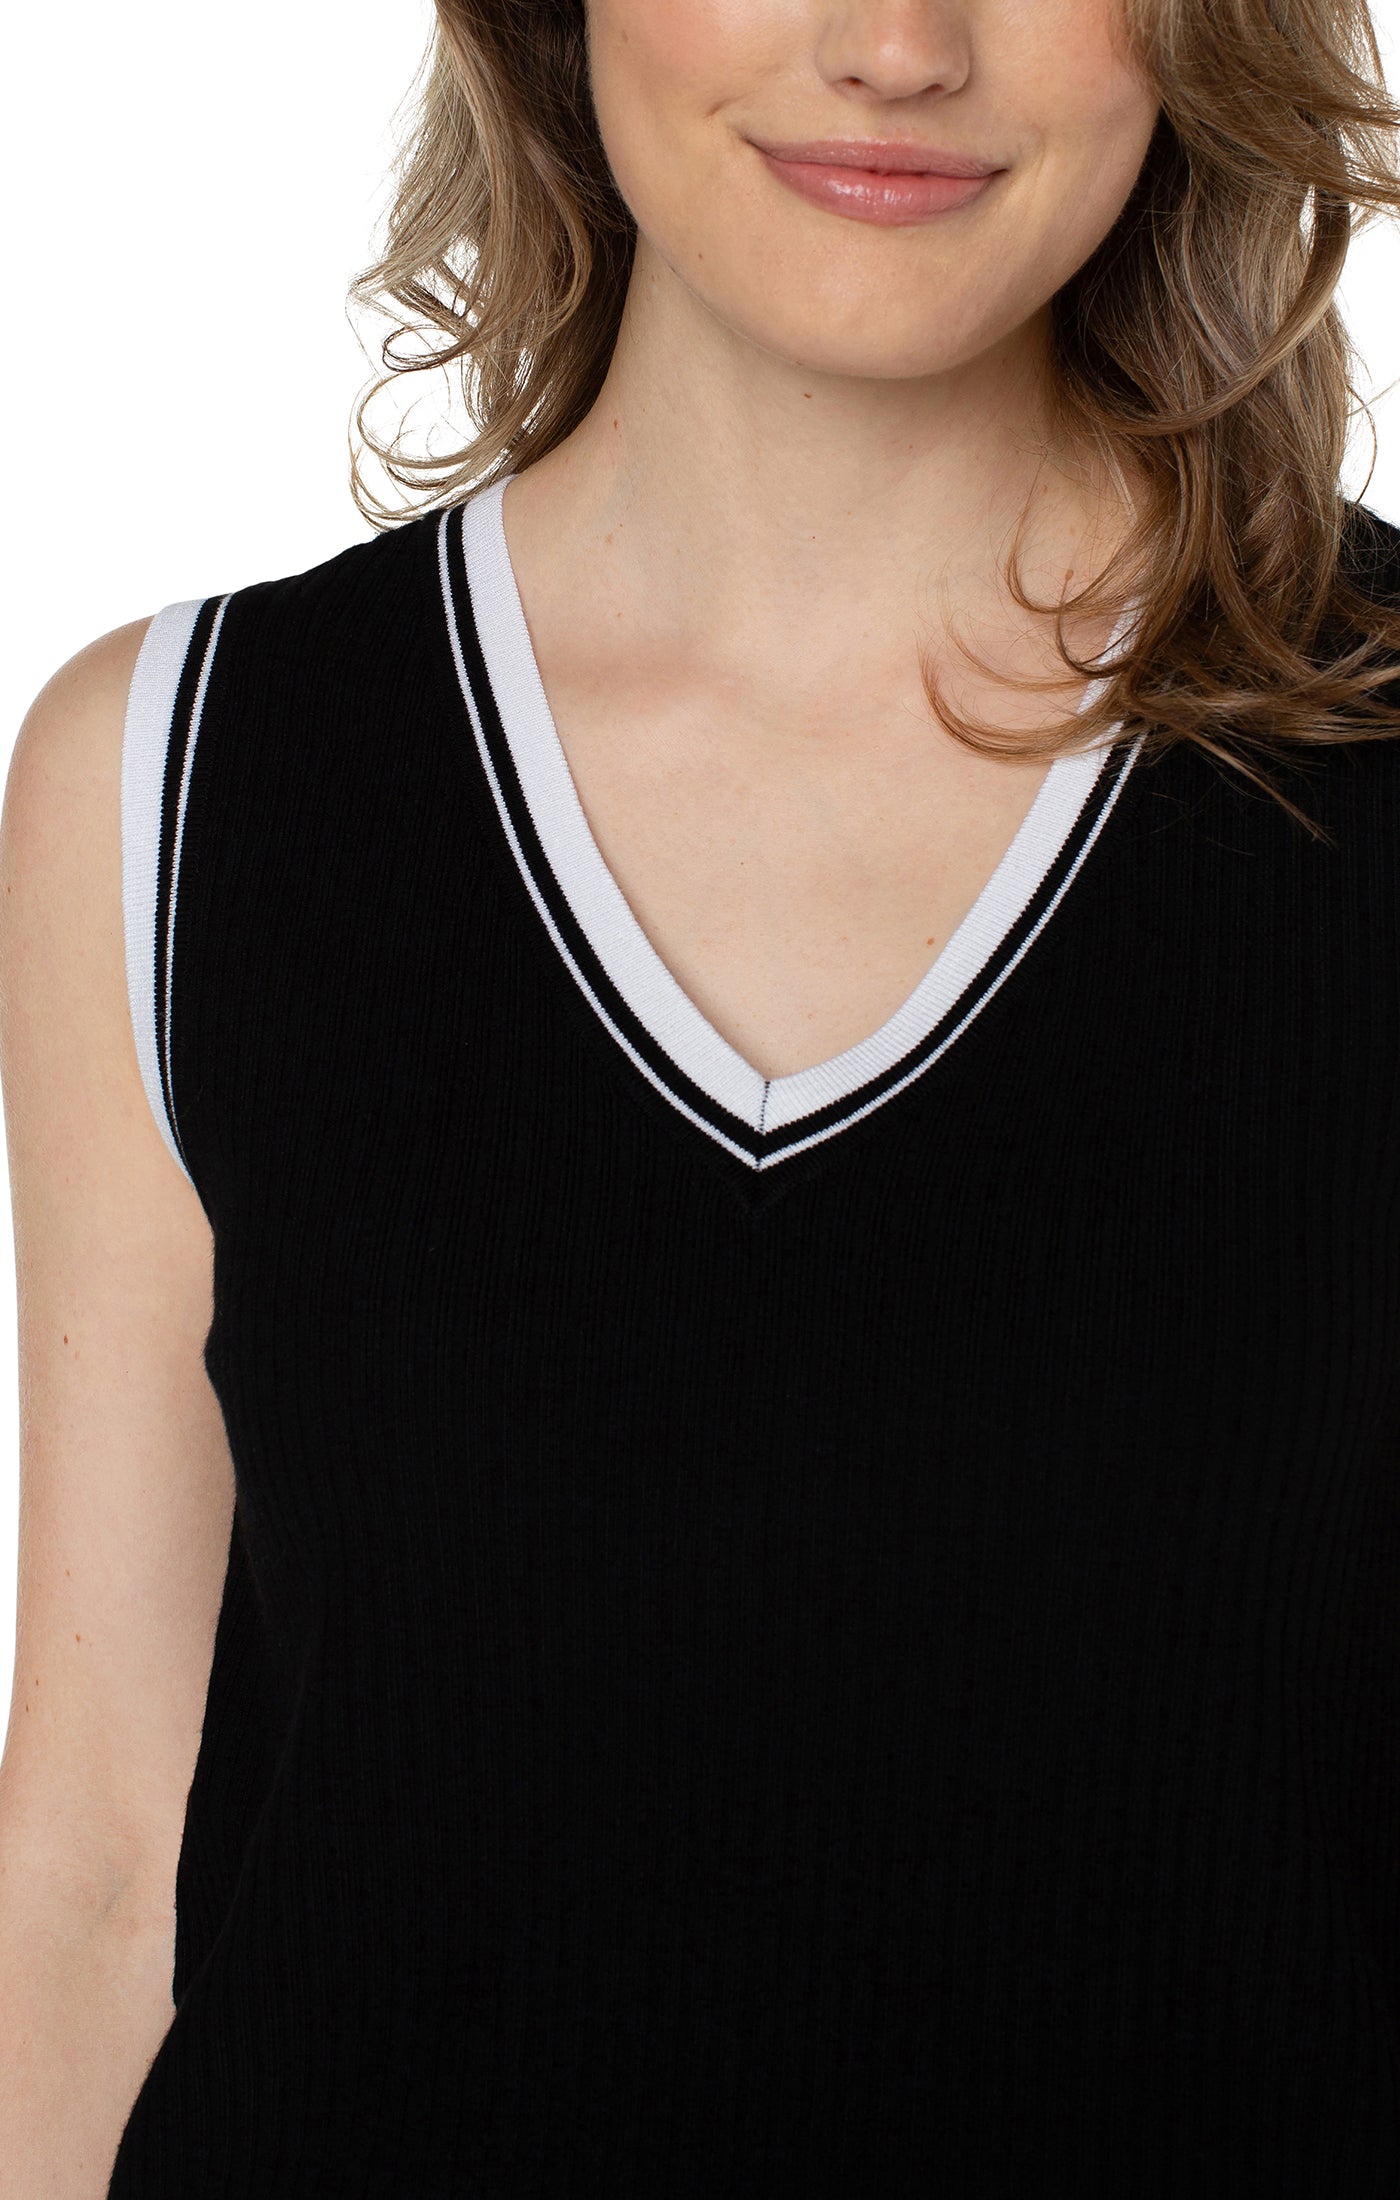 Liverpool Sleeveless V Neck Sweater - Black/white Contrast Close Up View